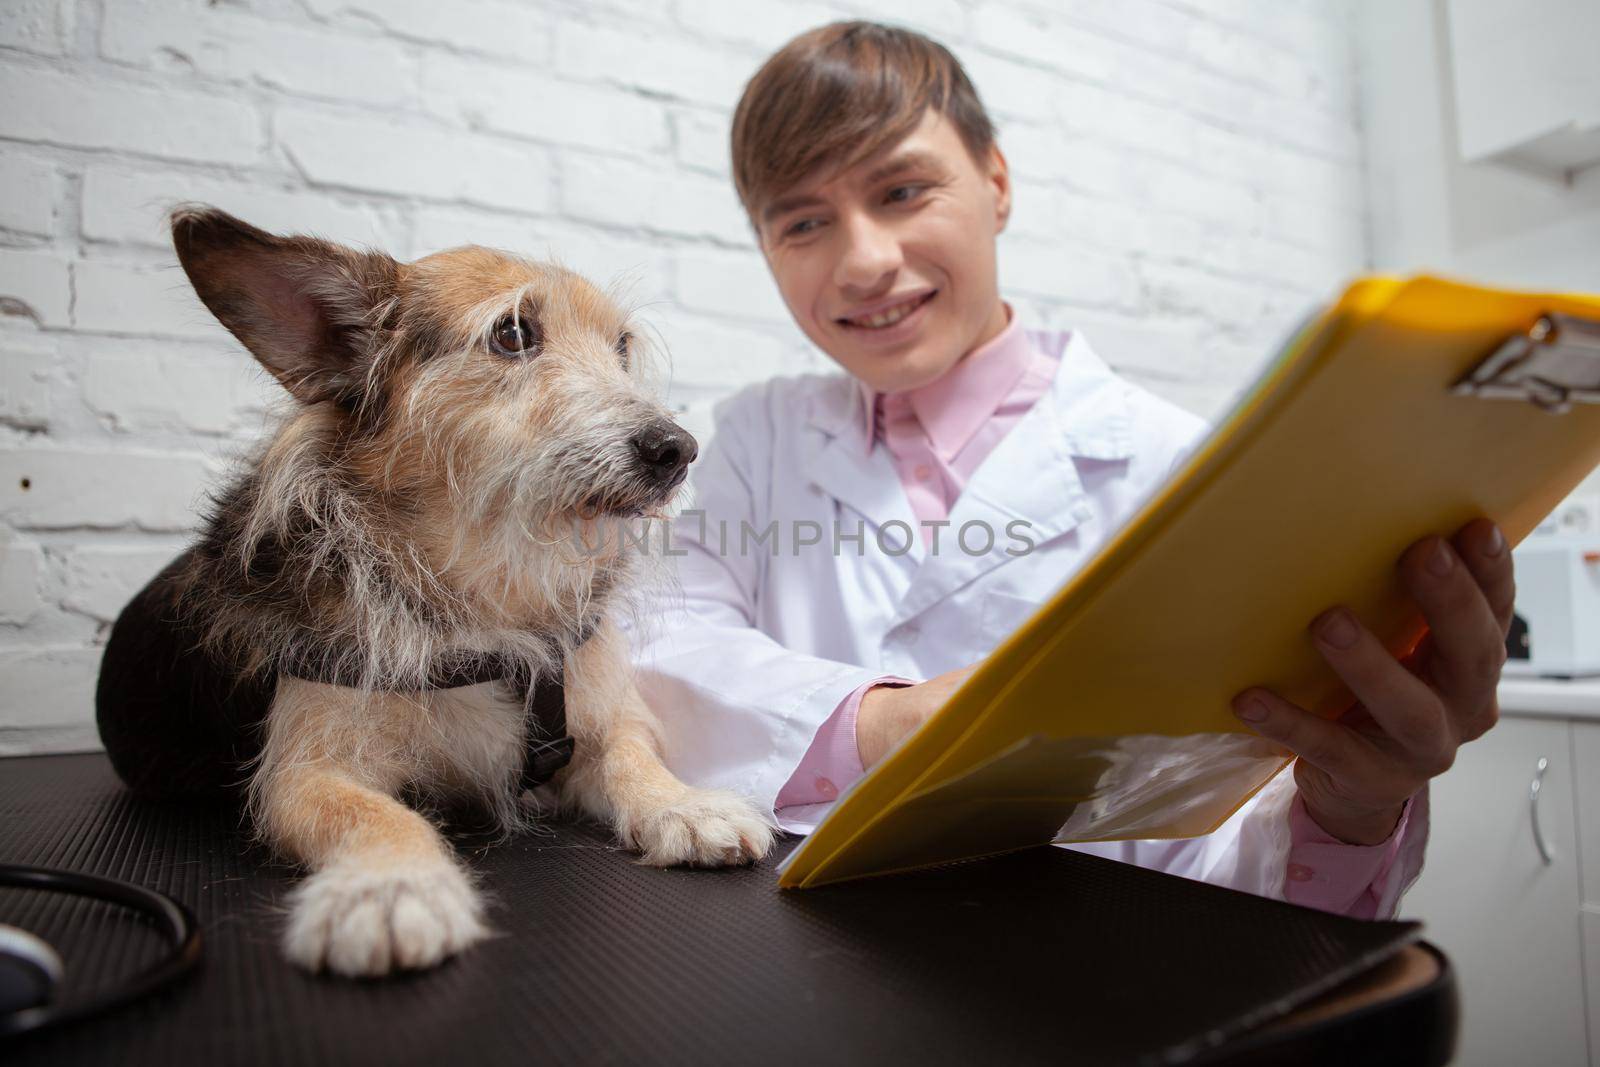 Cheerful male vet showing cute shelter dog his medical results on a clipboard after examination at vet clinic